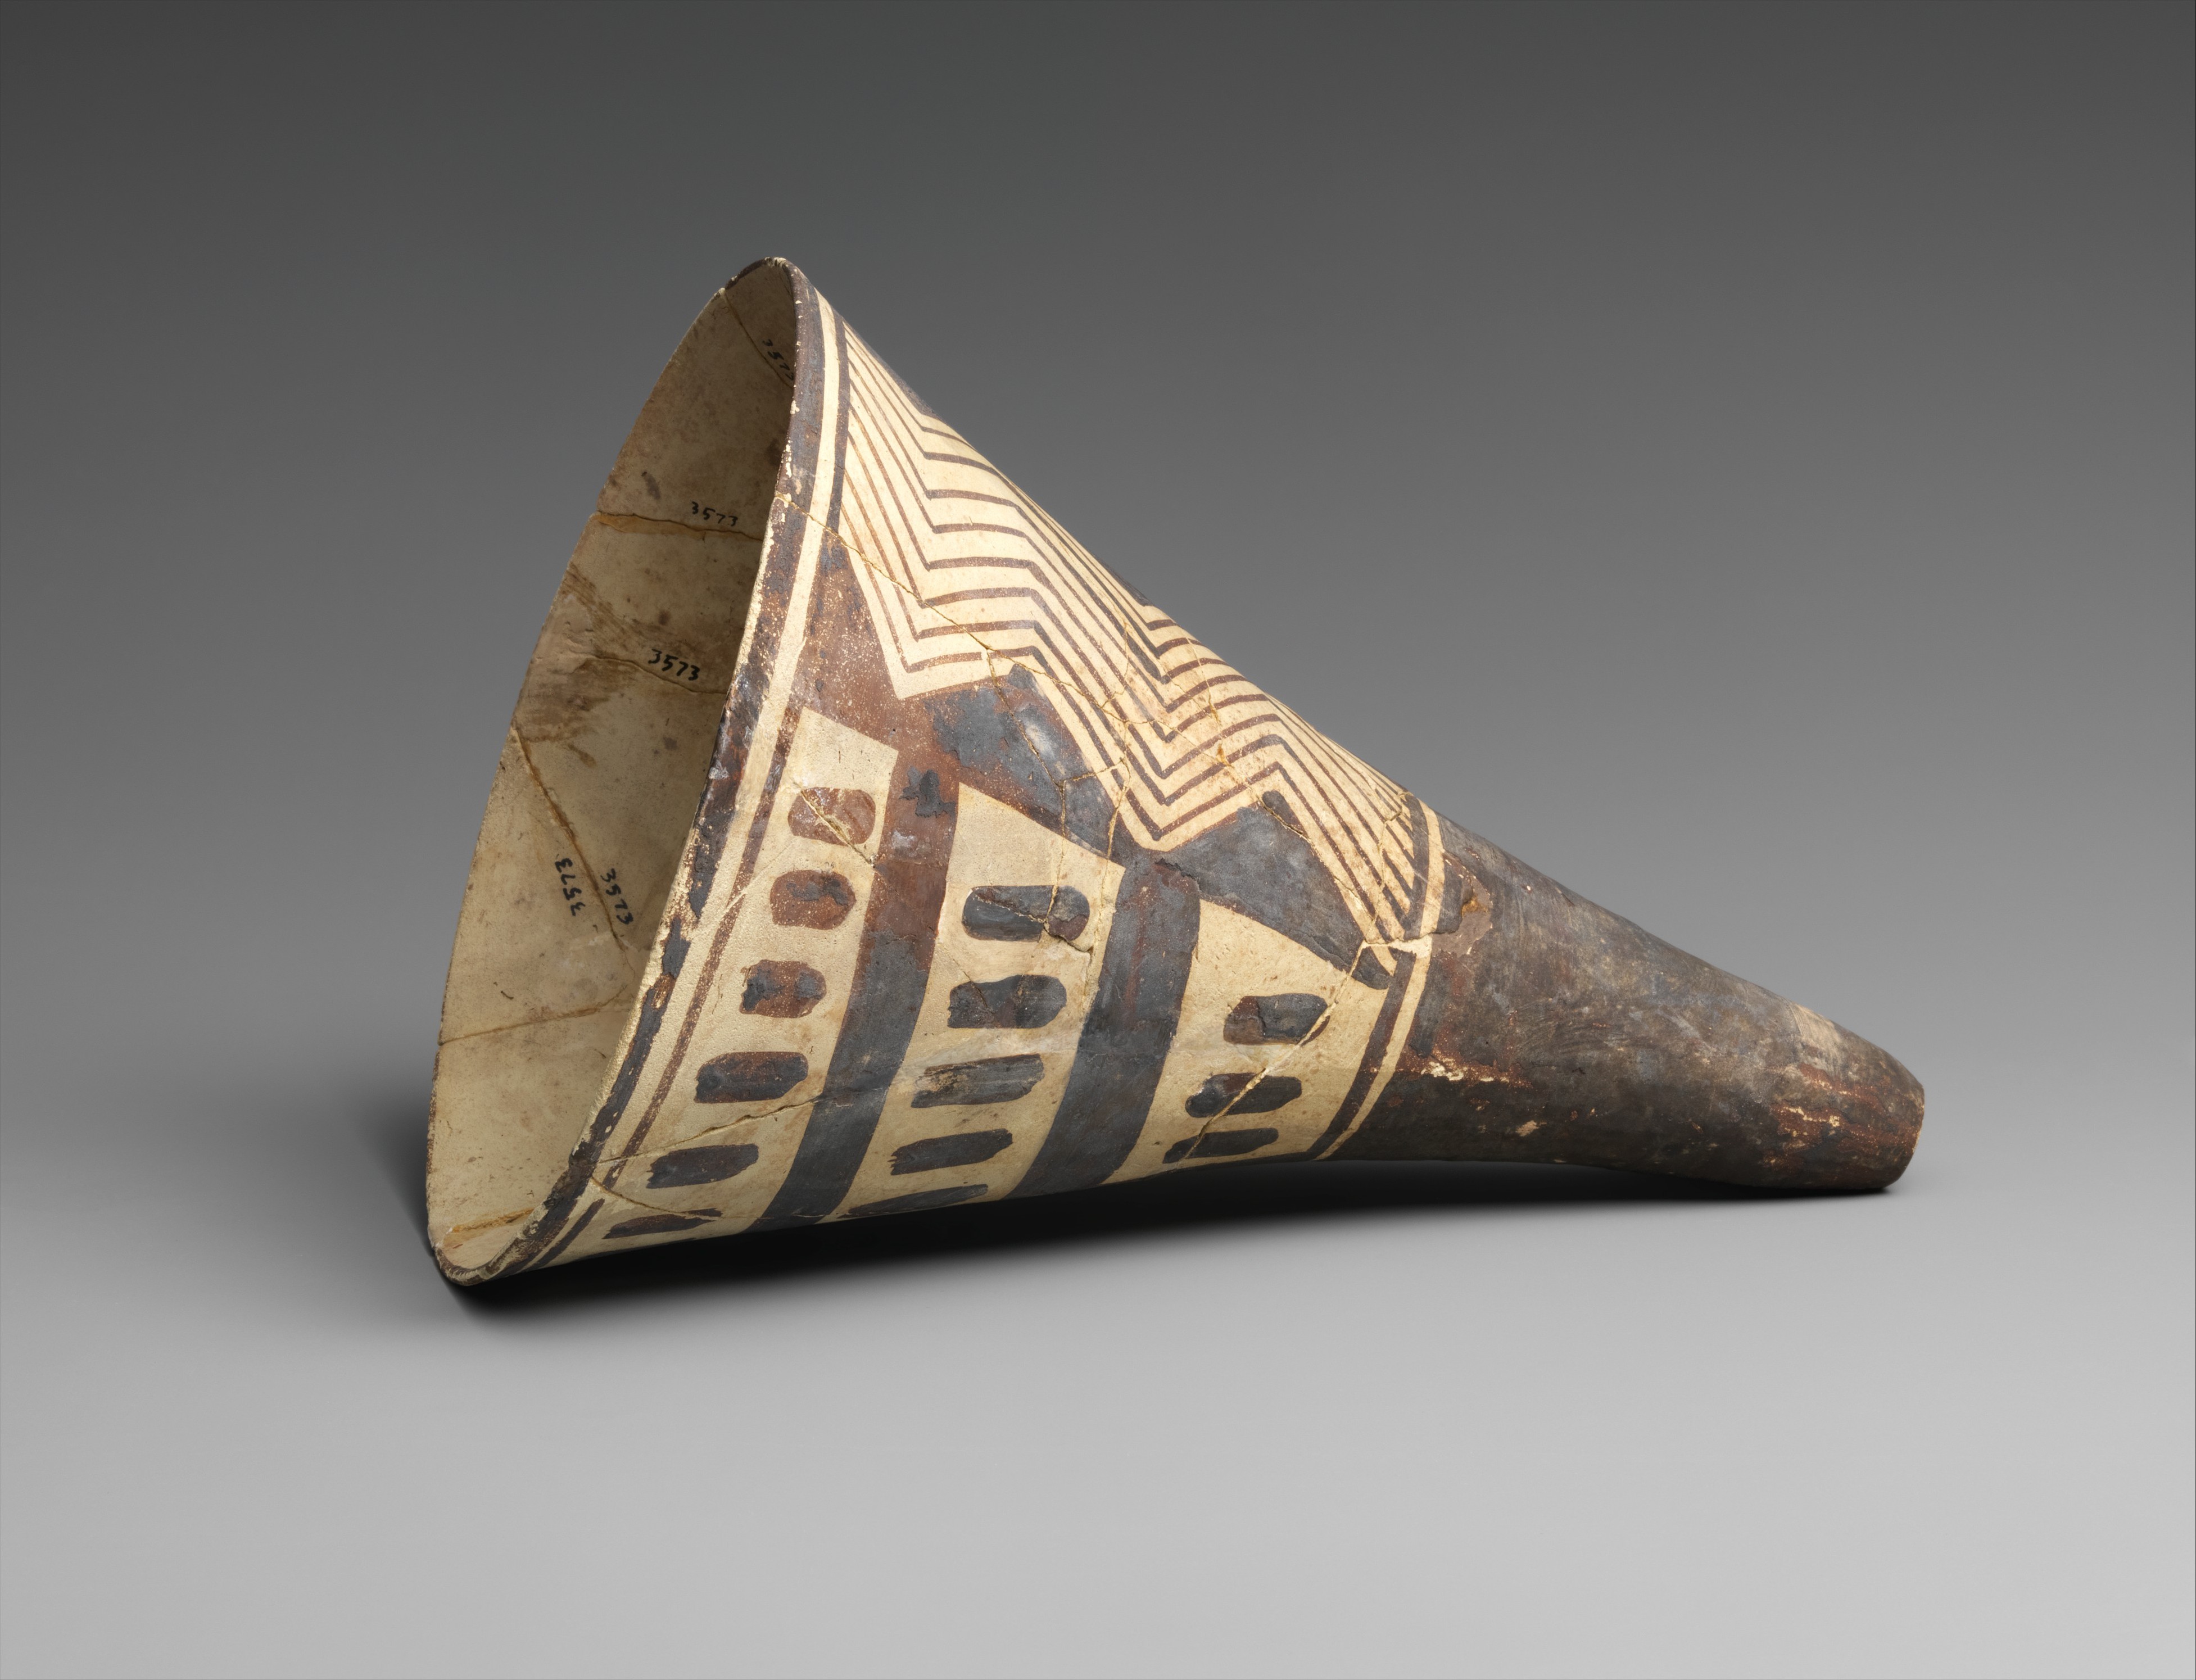 Cone-shaped vase with geometric decoration, Iran, Chalcolithic